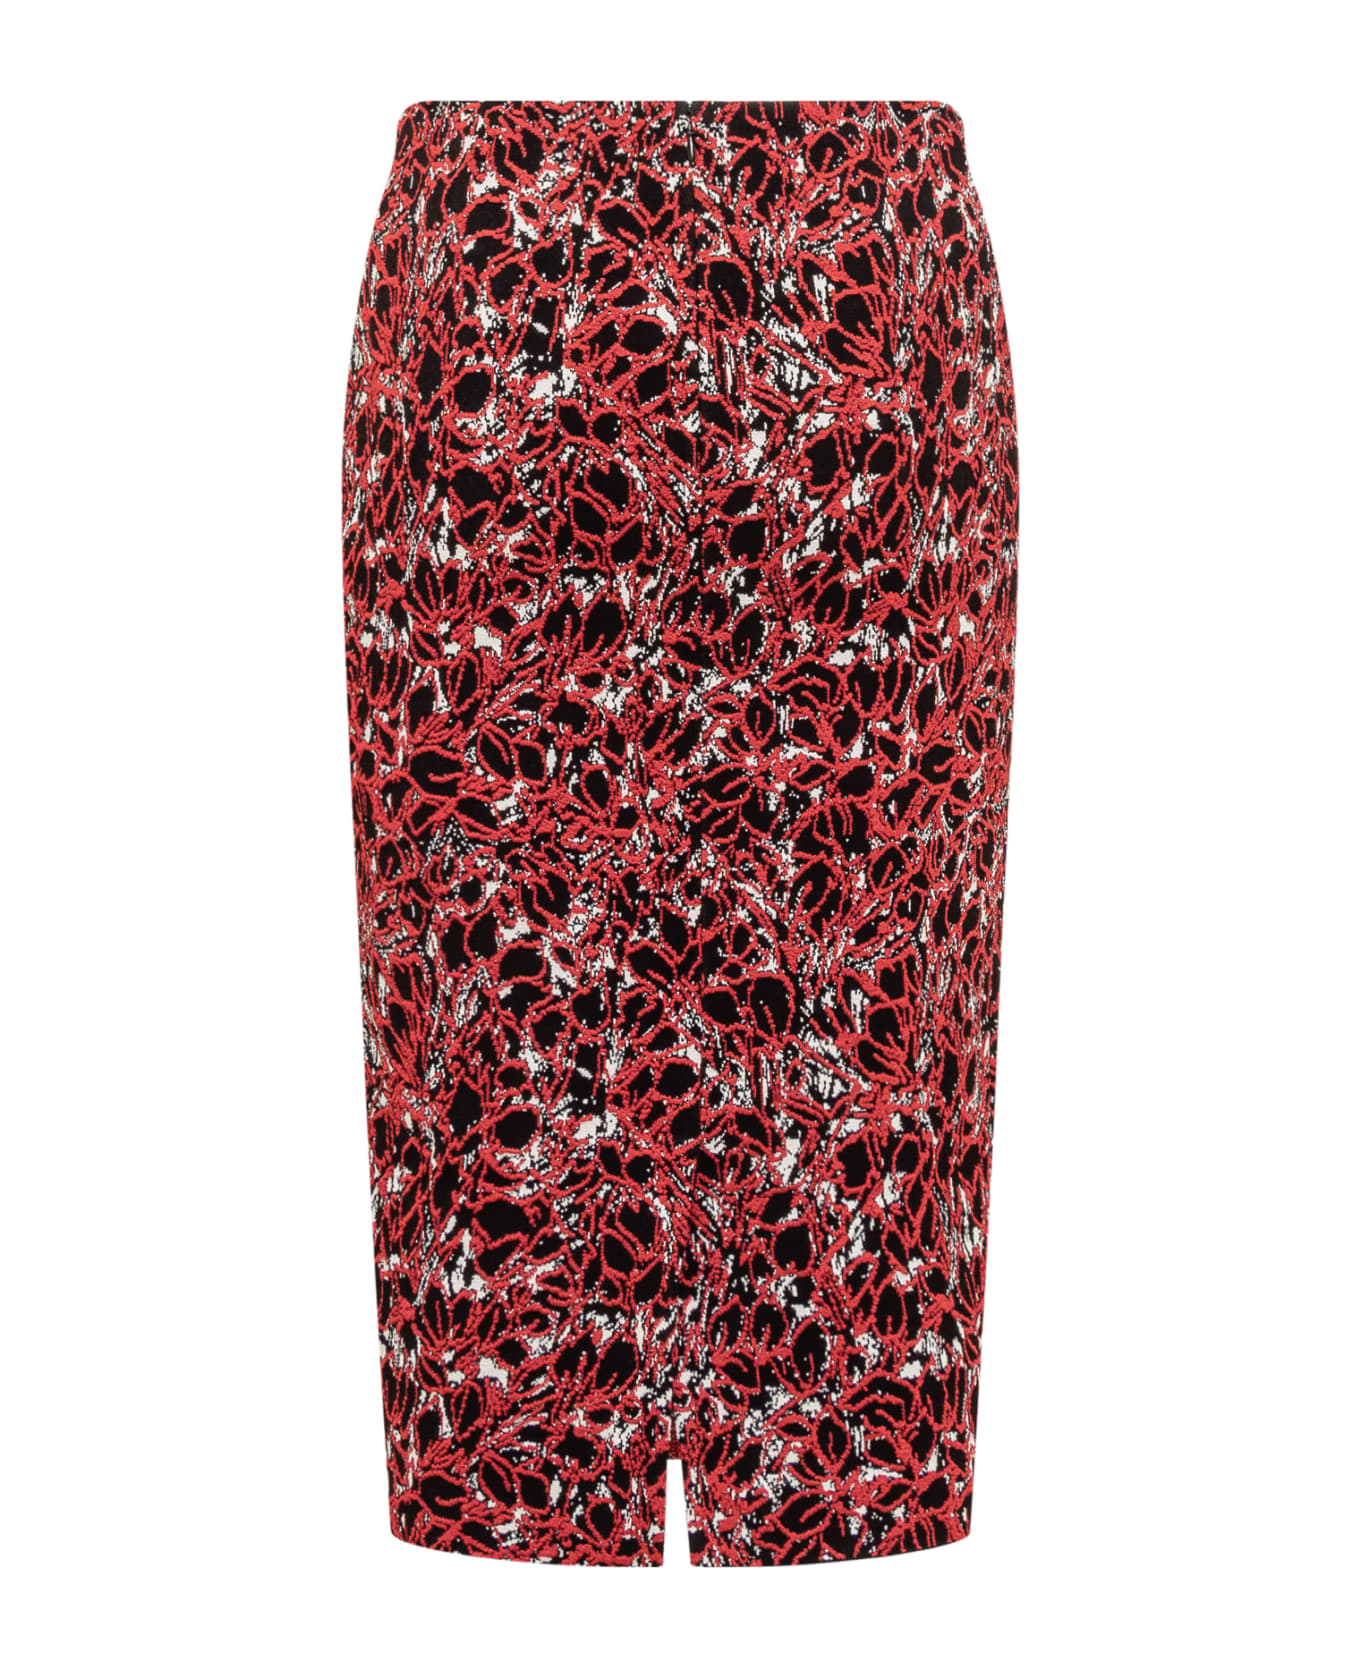 Del Core Knitted Midi Skirt - BLACK/RED